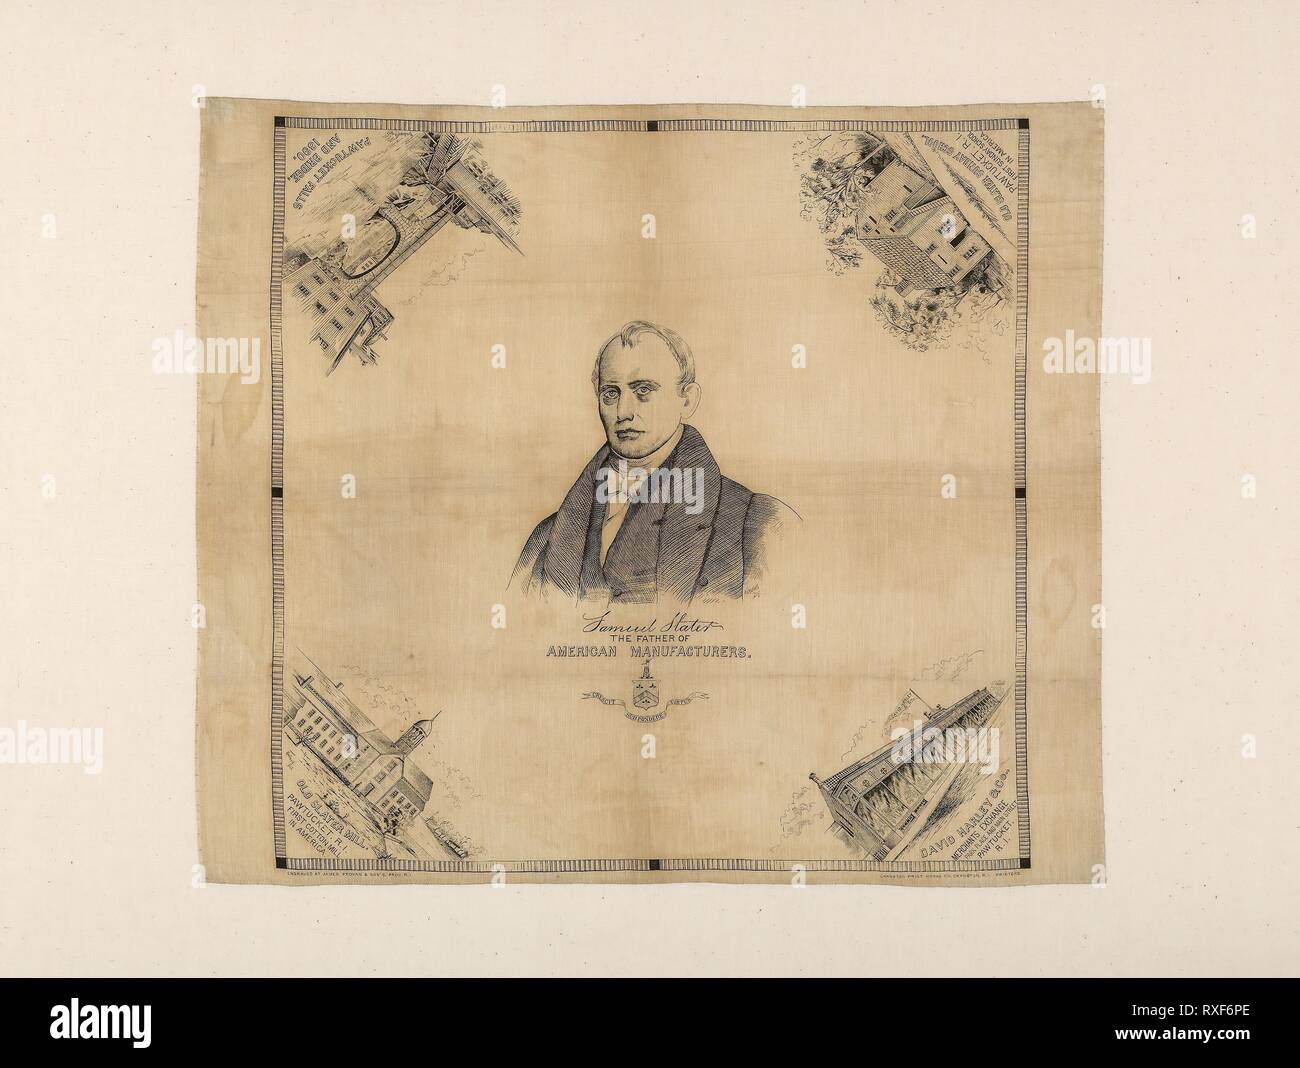 Samuel Slater, The Father of American Manufacturers (Handkerchief). Engraved by James Provan &amp; Son's (American, active 1890s) after a portrait by James Sullivan Lincoln (American, 1811-1888); Manufactured by Cranston Print Works Co. (American, active 1890); United States, Rhode Island, Cranston. Date: 1890. Dimensions: 58.15 x 66.7 cm (22 7/8 x 26 1/4 in.). Cotton, plain weave; engraved roller printed. Origin: Rhode Island. Museum: The Chicago Art Institute. Author: Cranston Print Works Company. Stock Photo